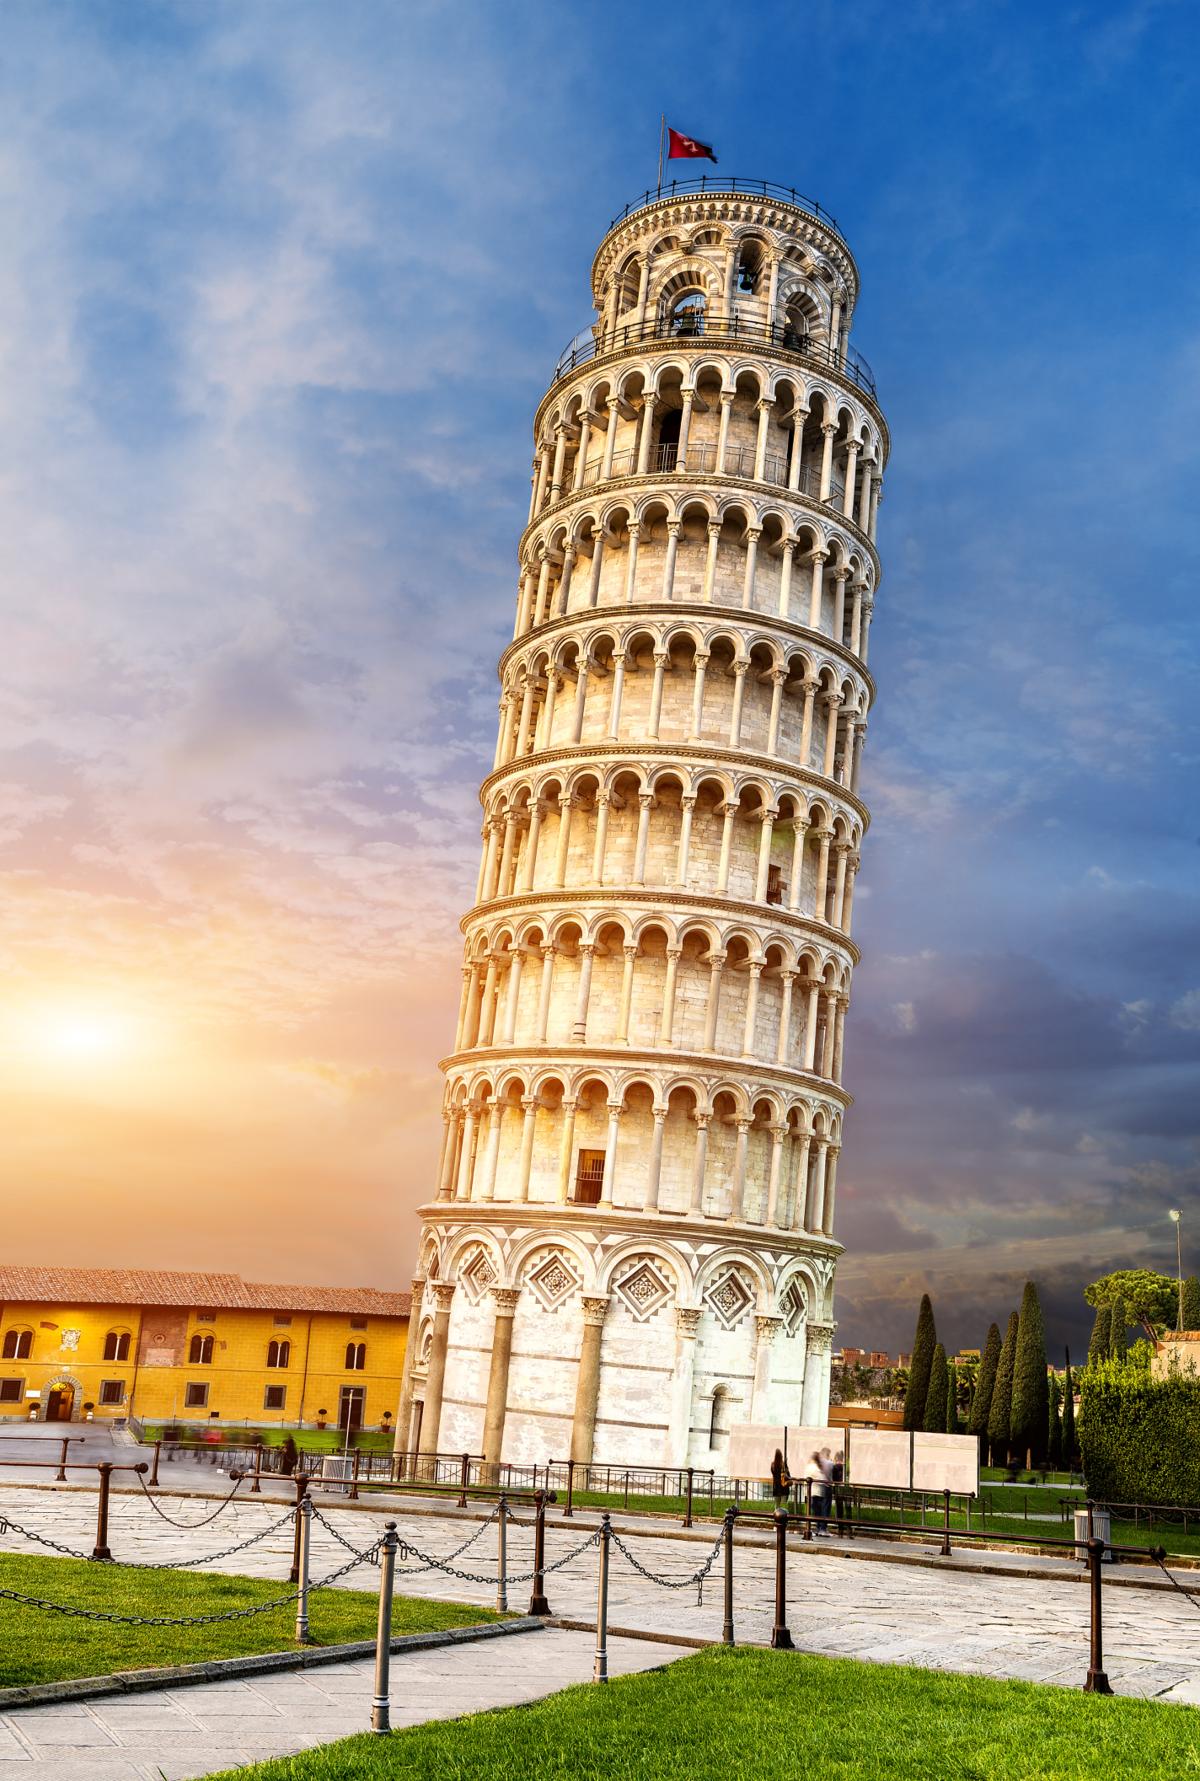 These Facts Reveal the Miracle That is the Leaning Tower of Pisa